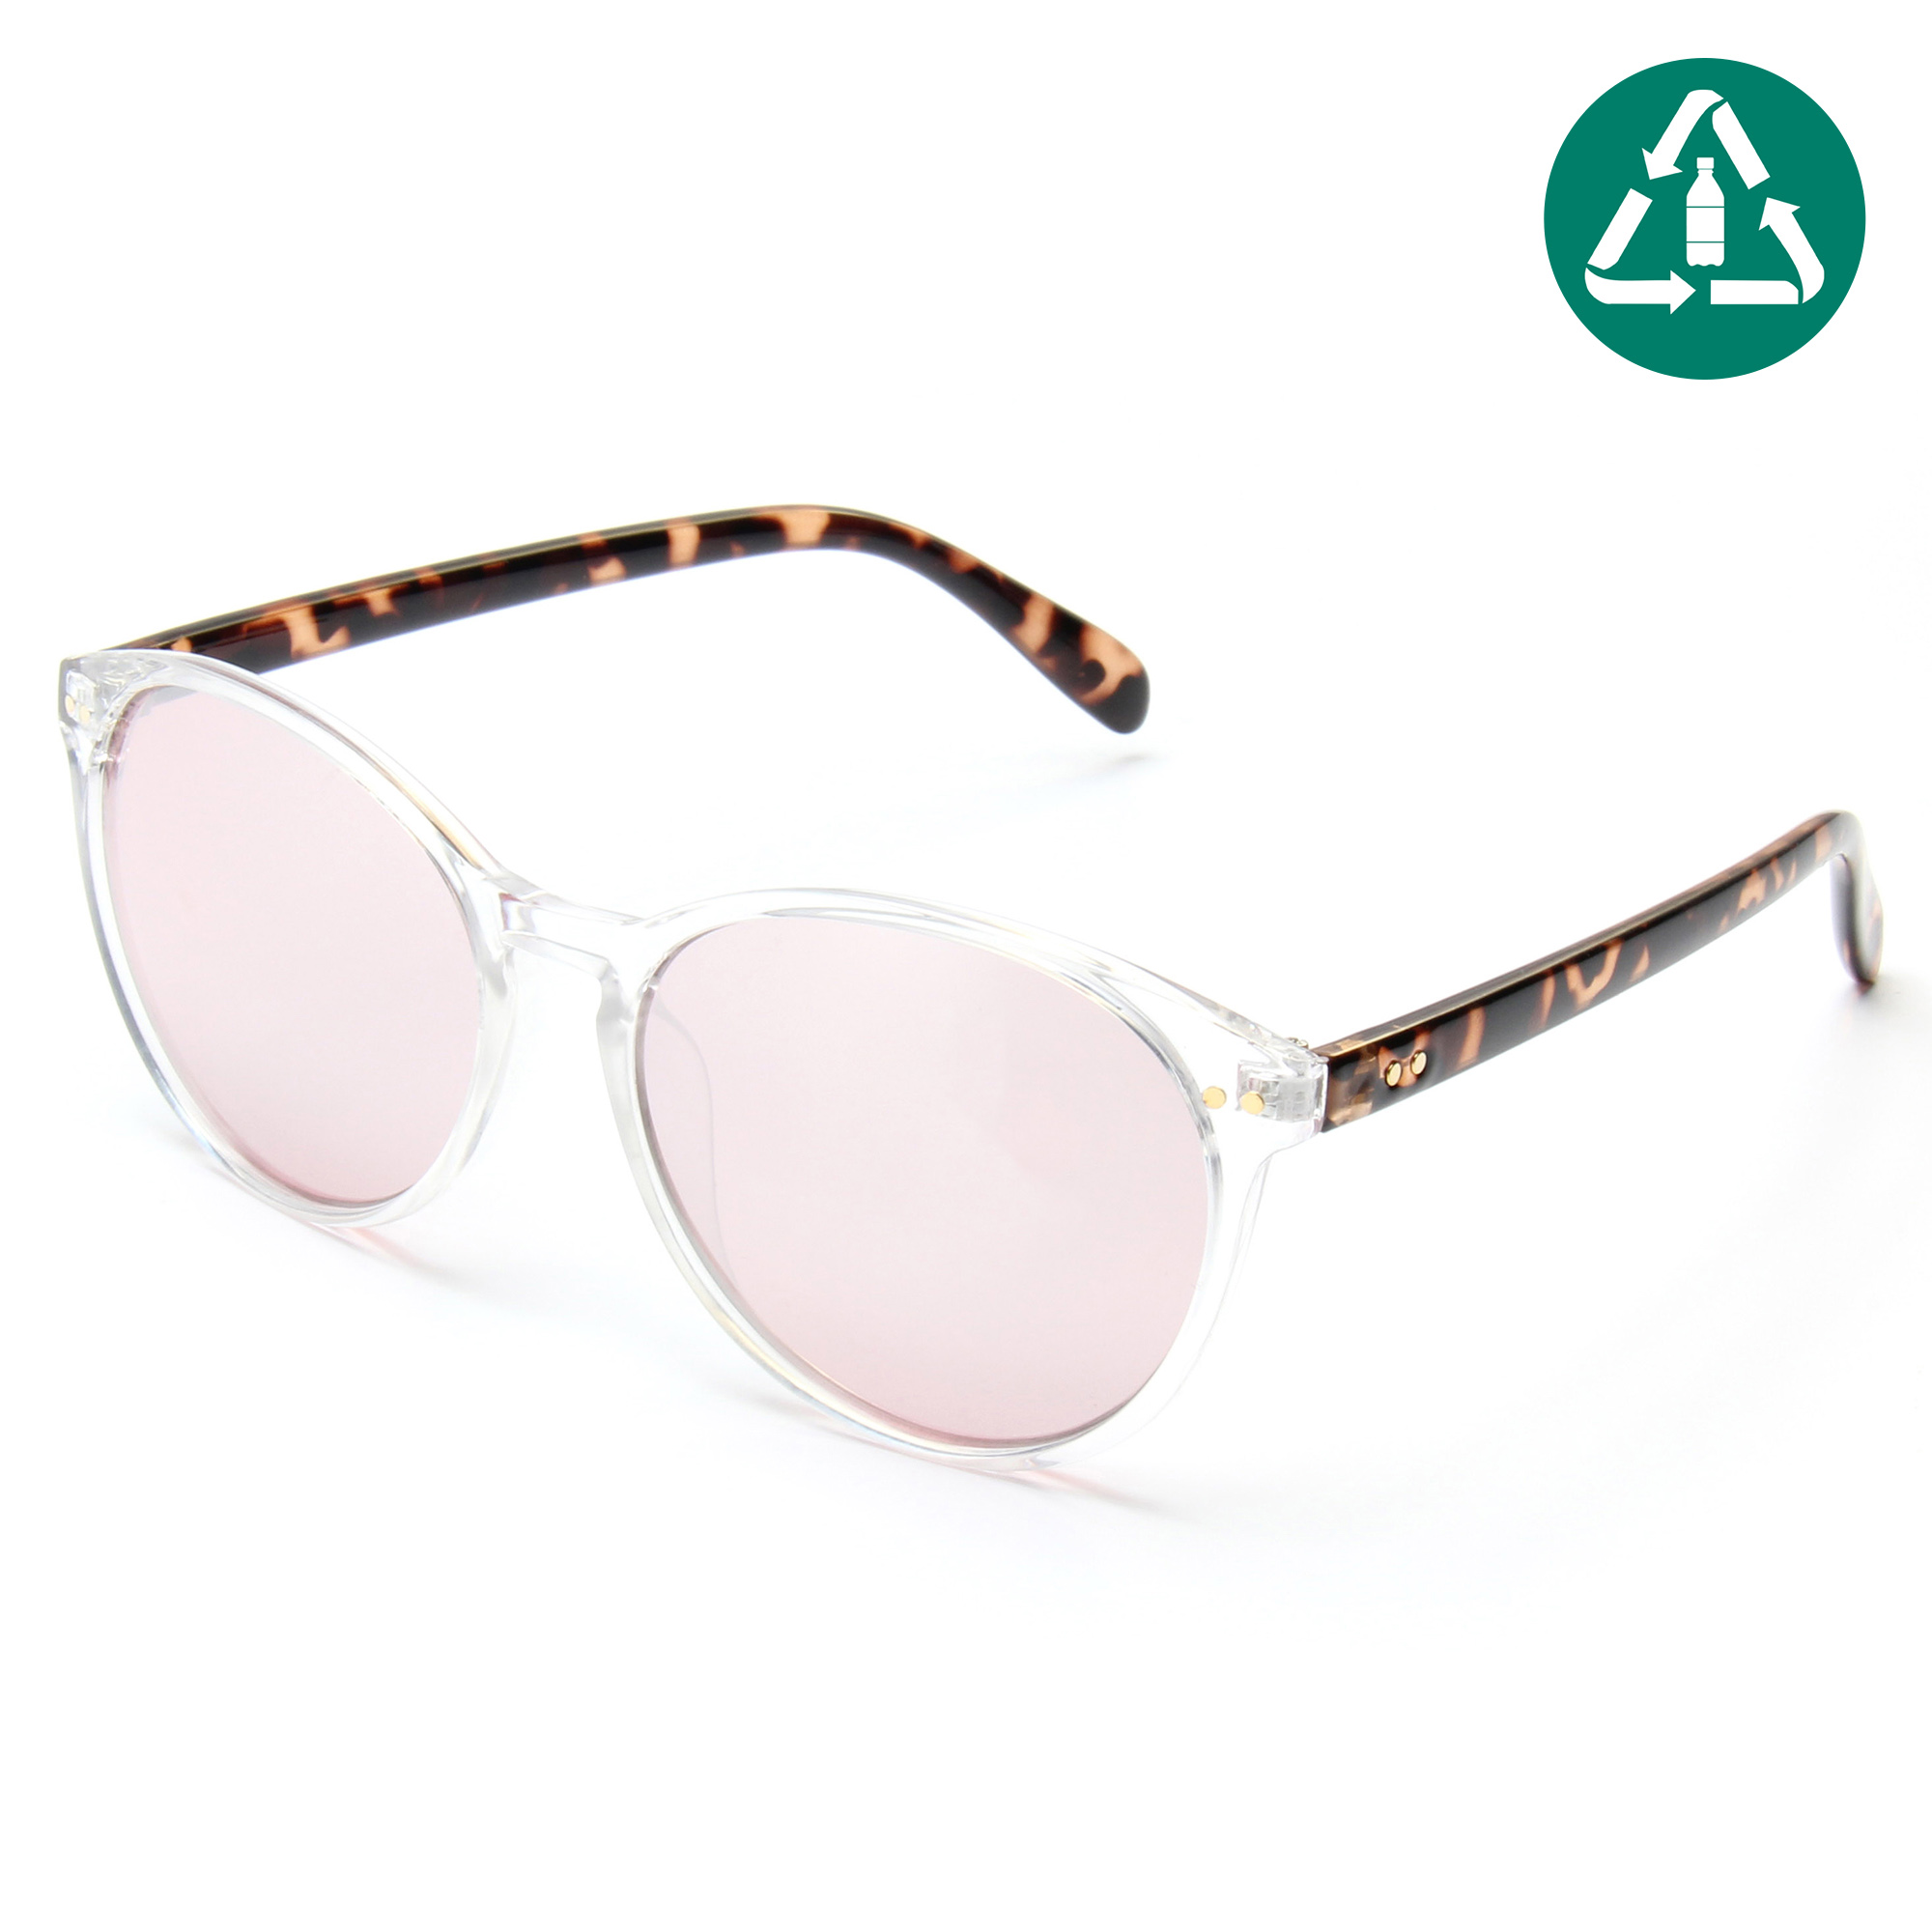 EUGENIA Popular Fashion Manufacturers Wholesale 100% RPCTG Round Recycled Sunglasses